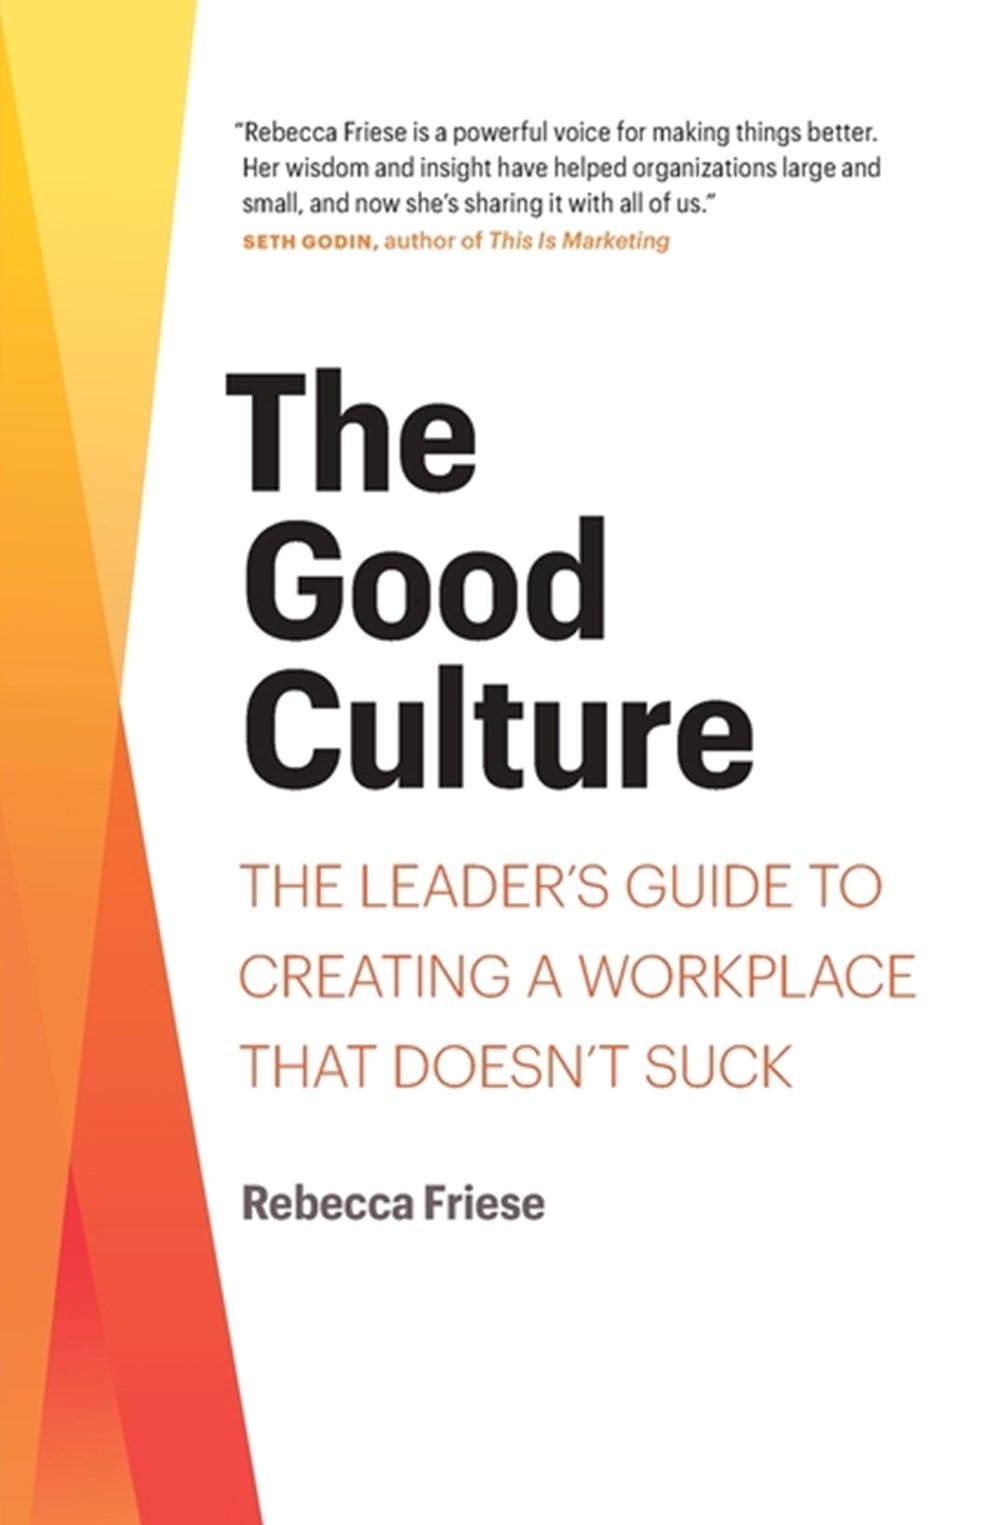 Good Culture: The Leader's Guide to Creating a Workplace That Doesn't Suck